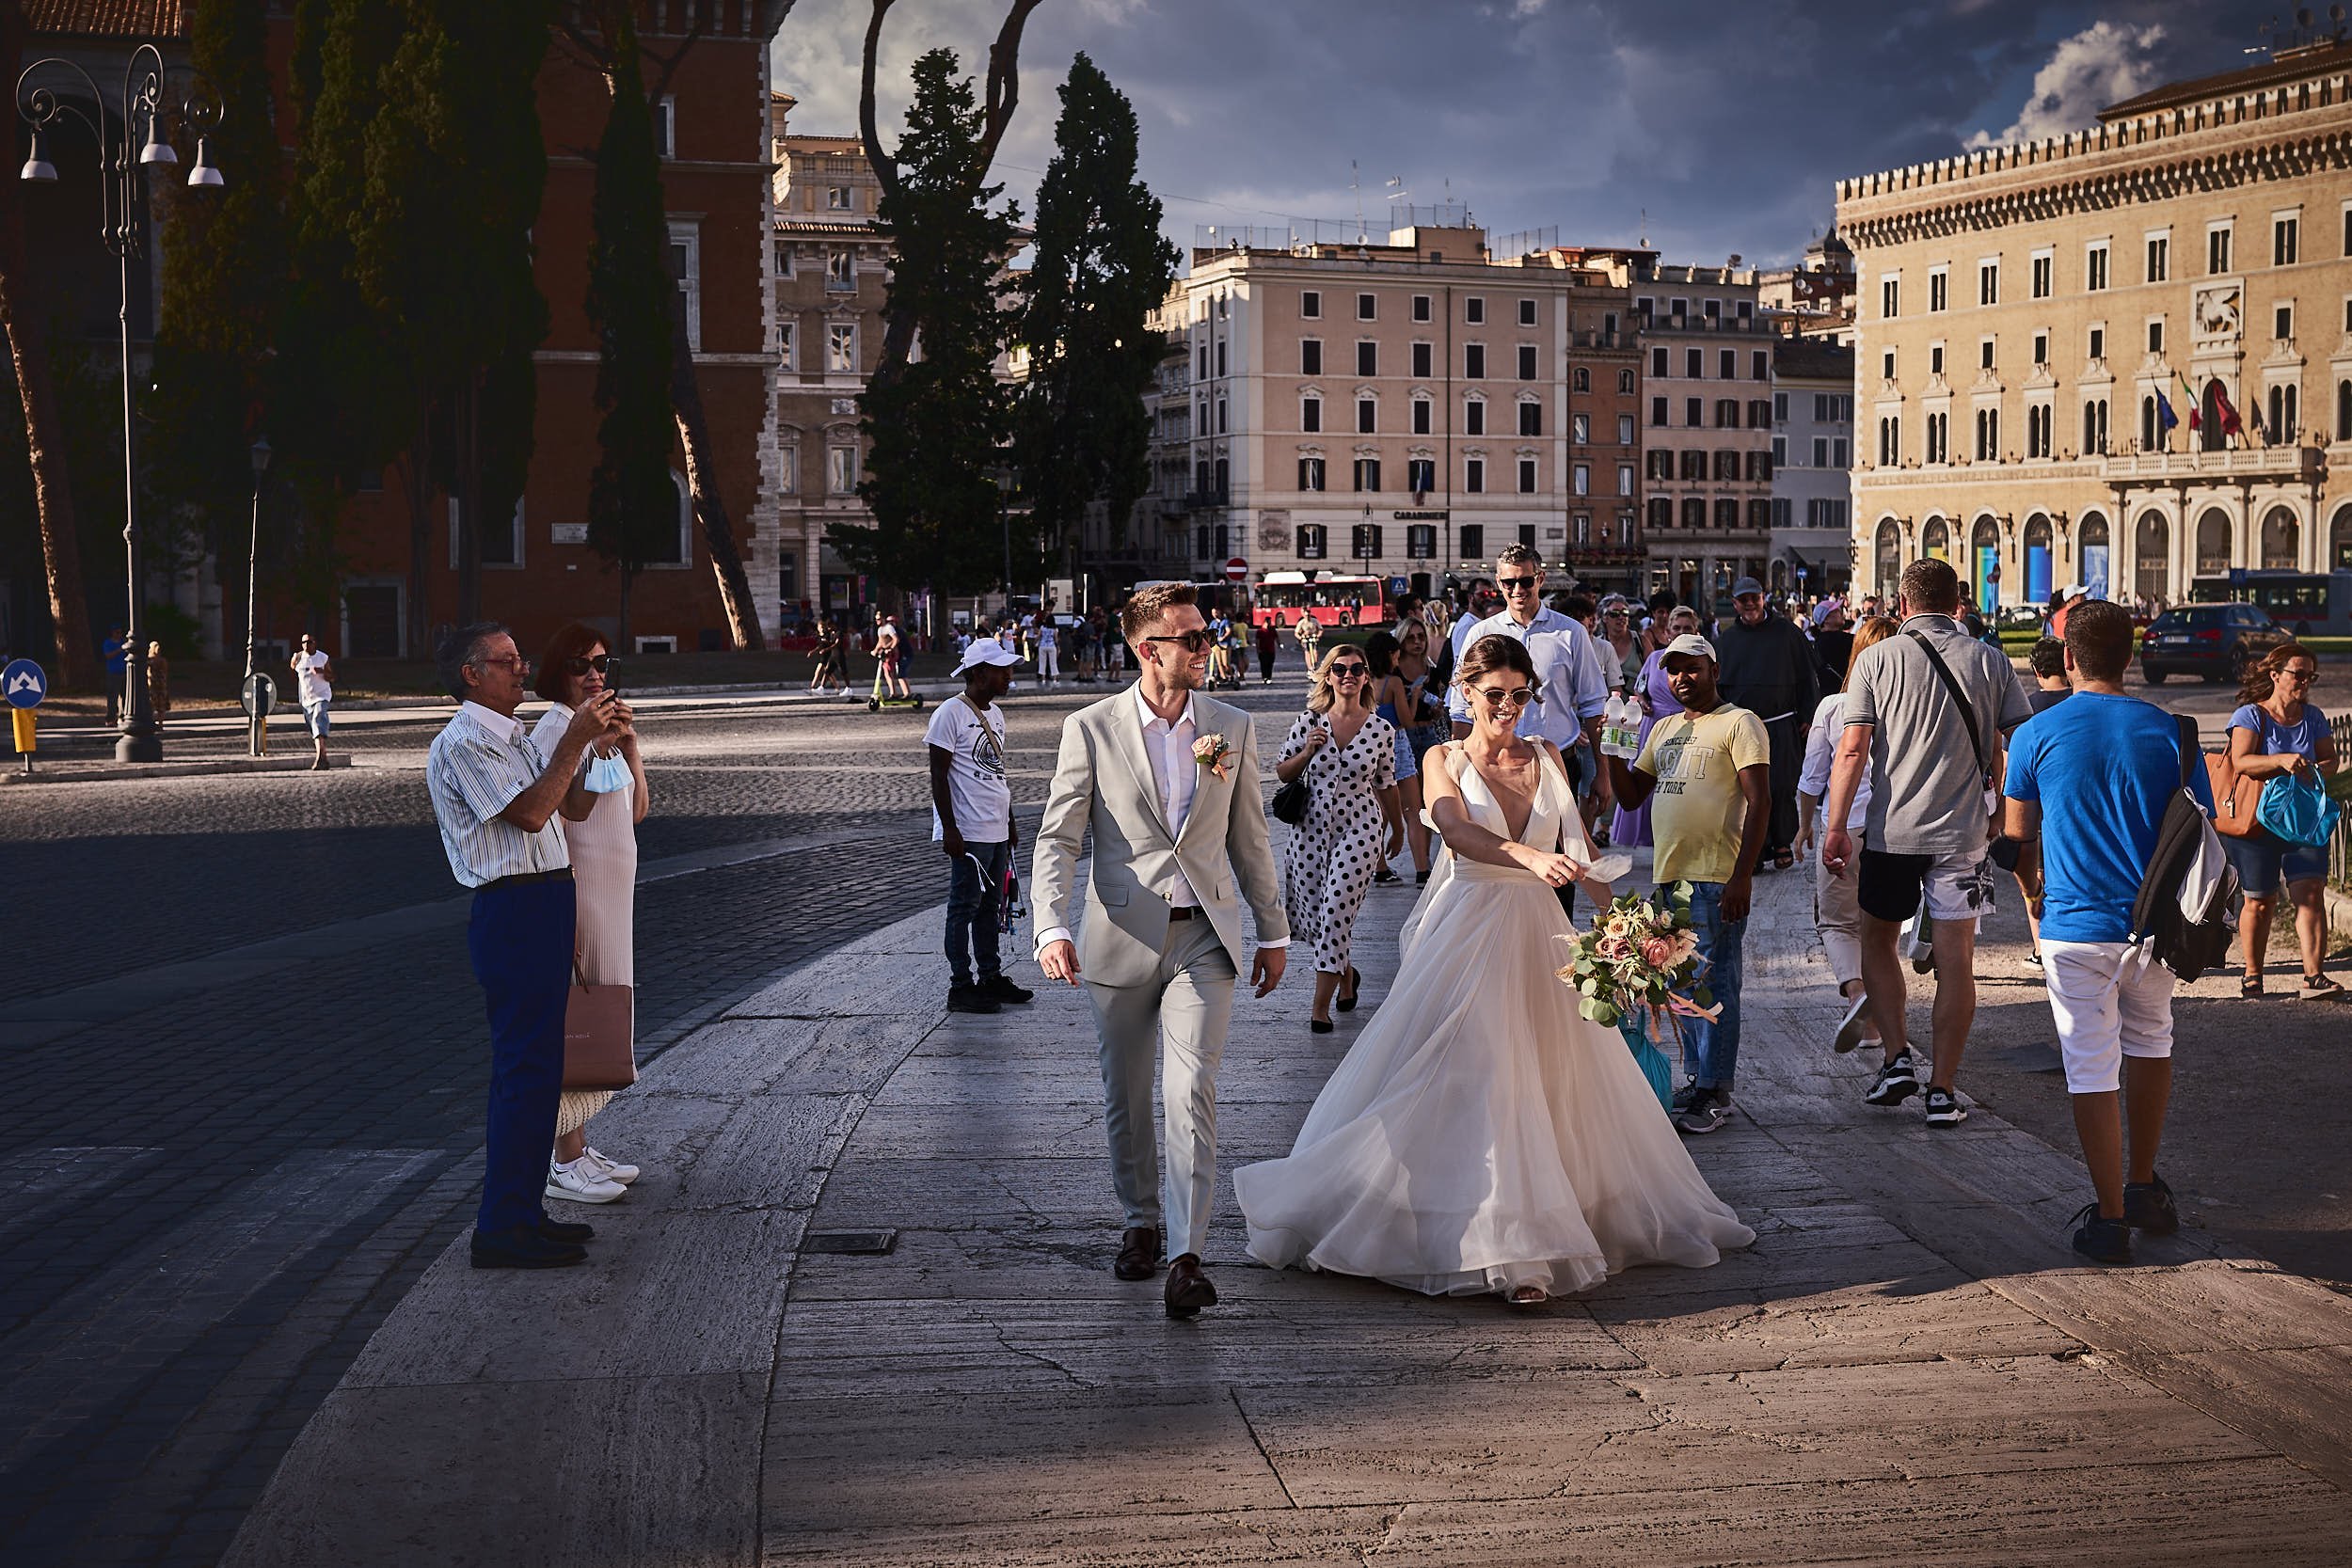 Bride and Groom walking in Piazza Venezia. A lot of tourist around them